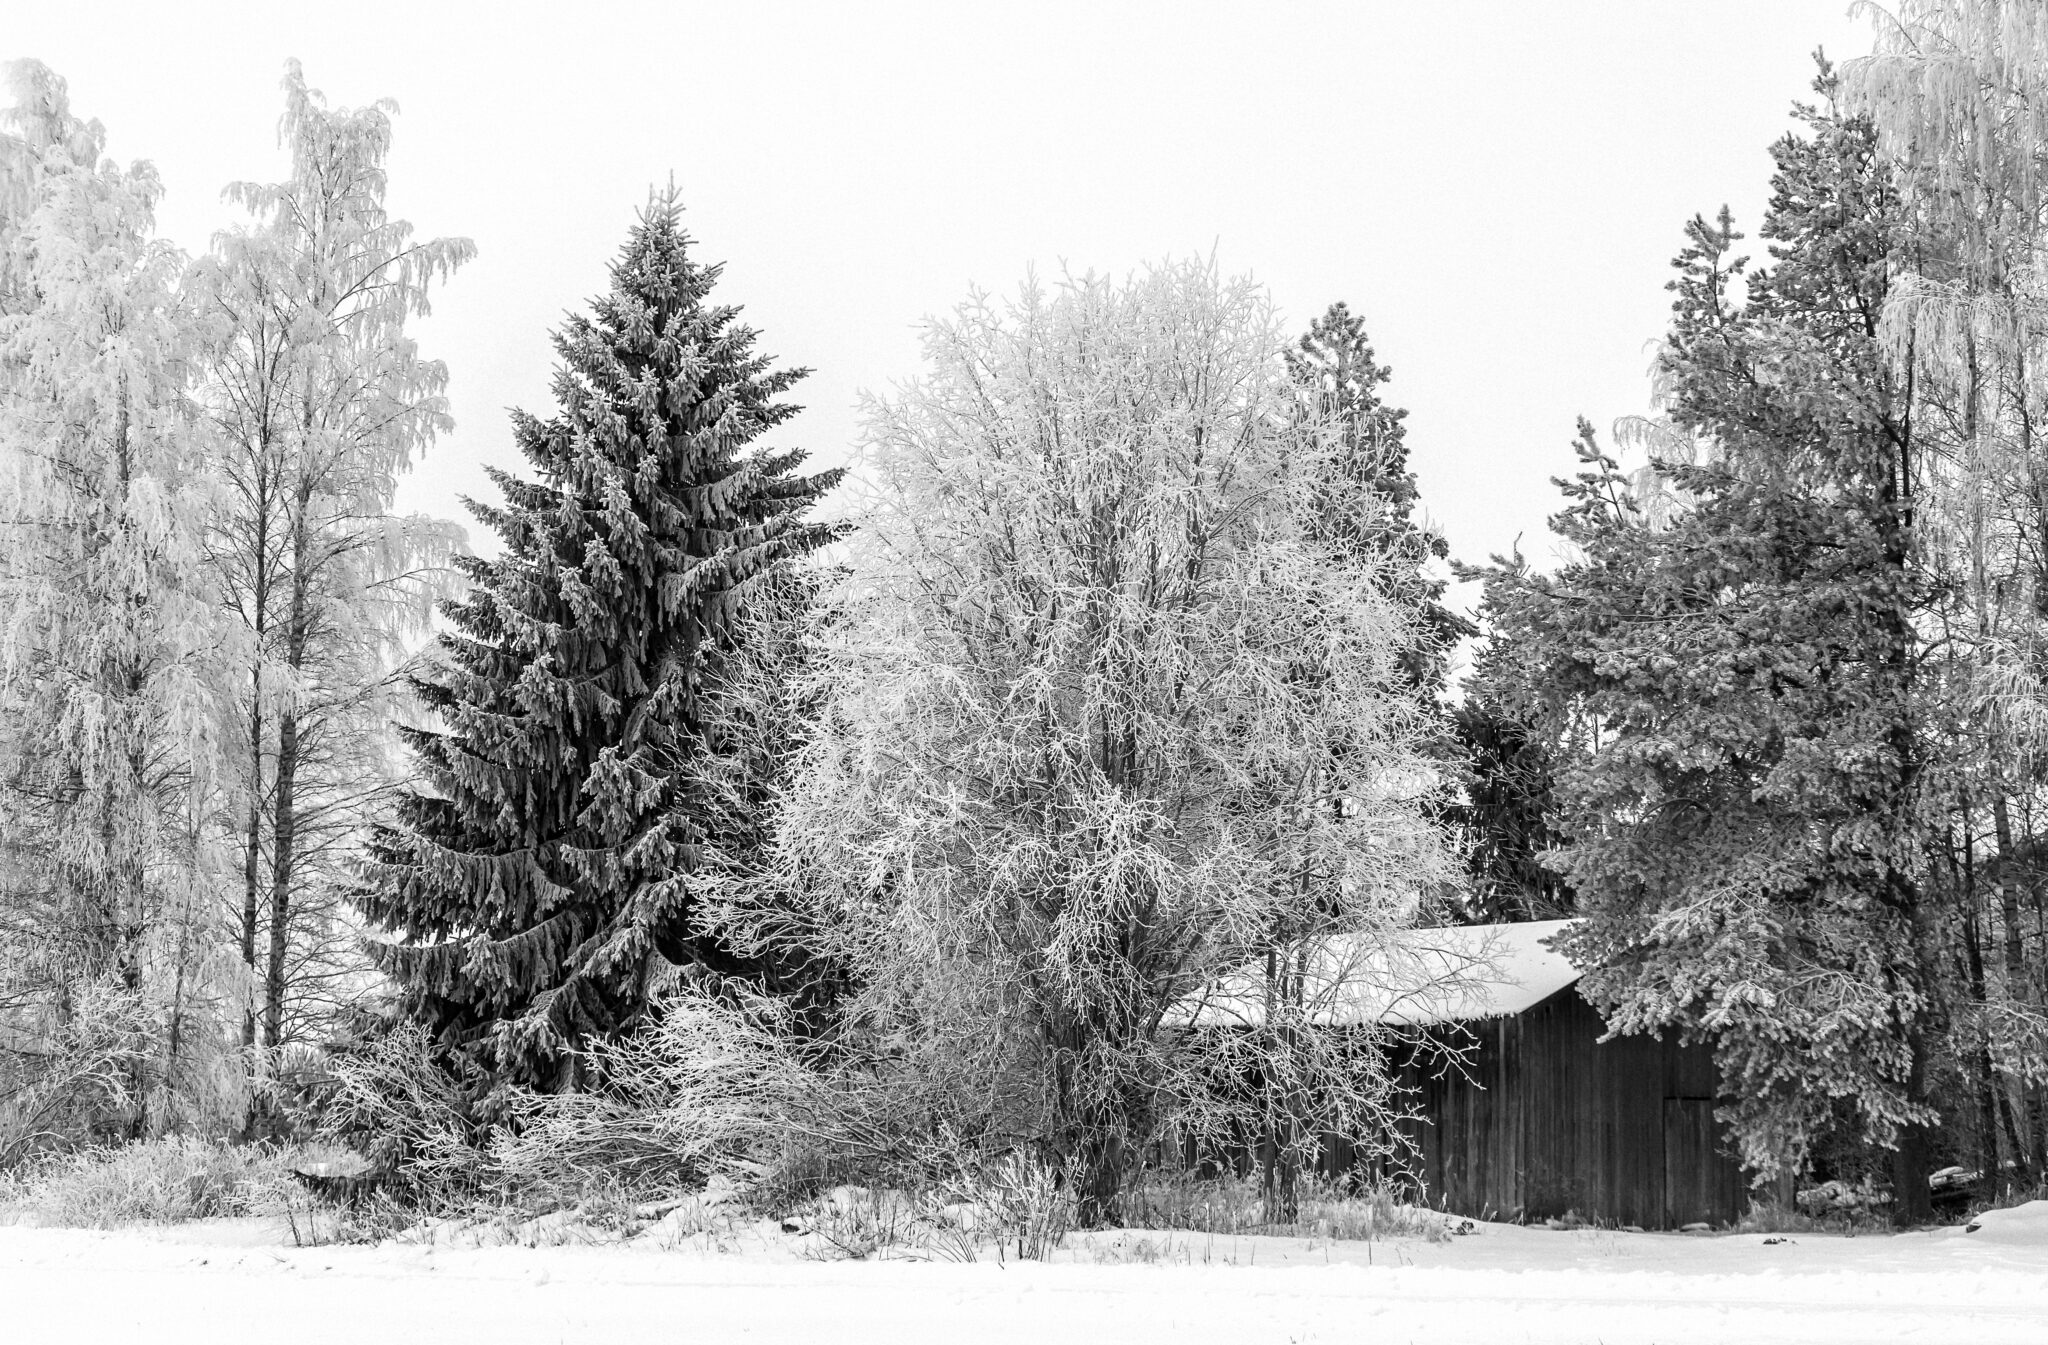 Some Trees and One Barn – Winter Wonderland